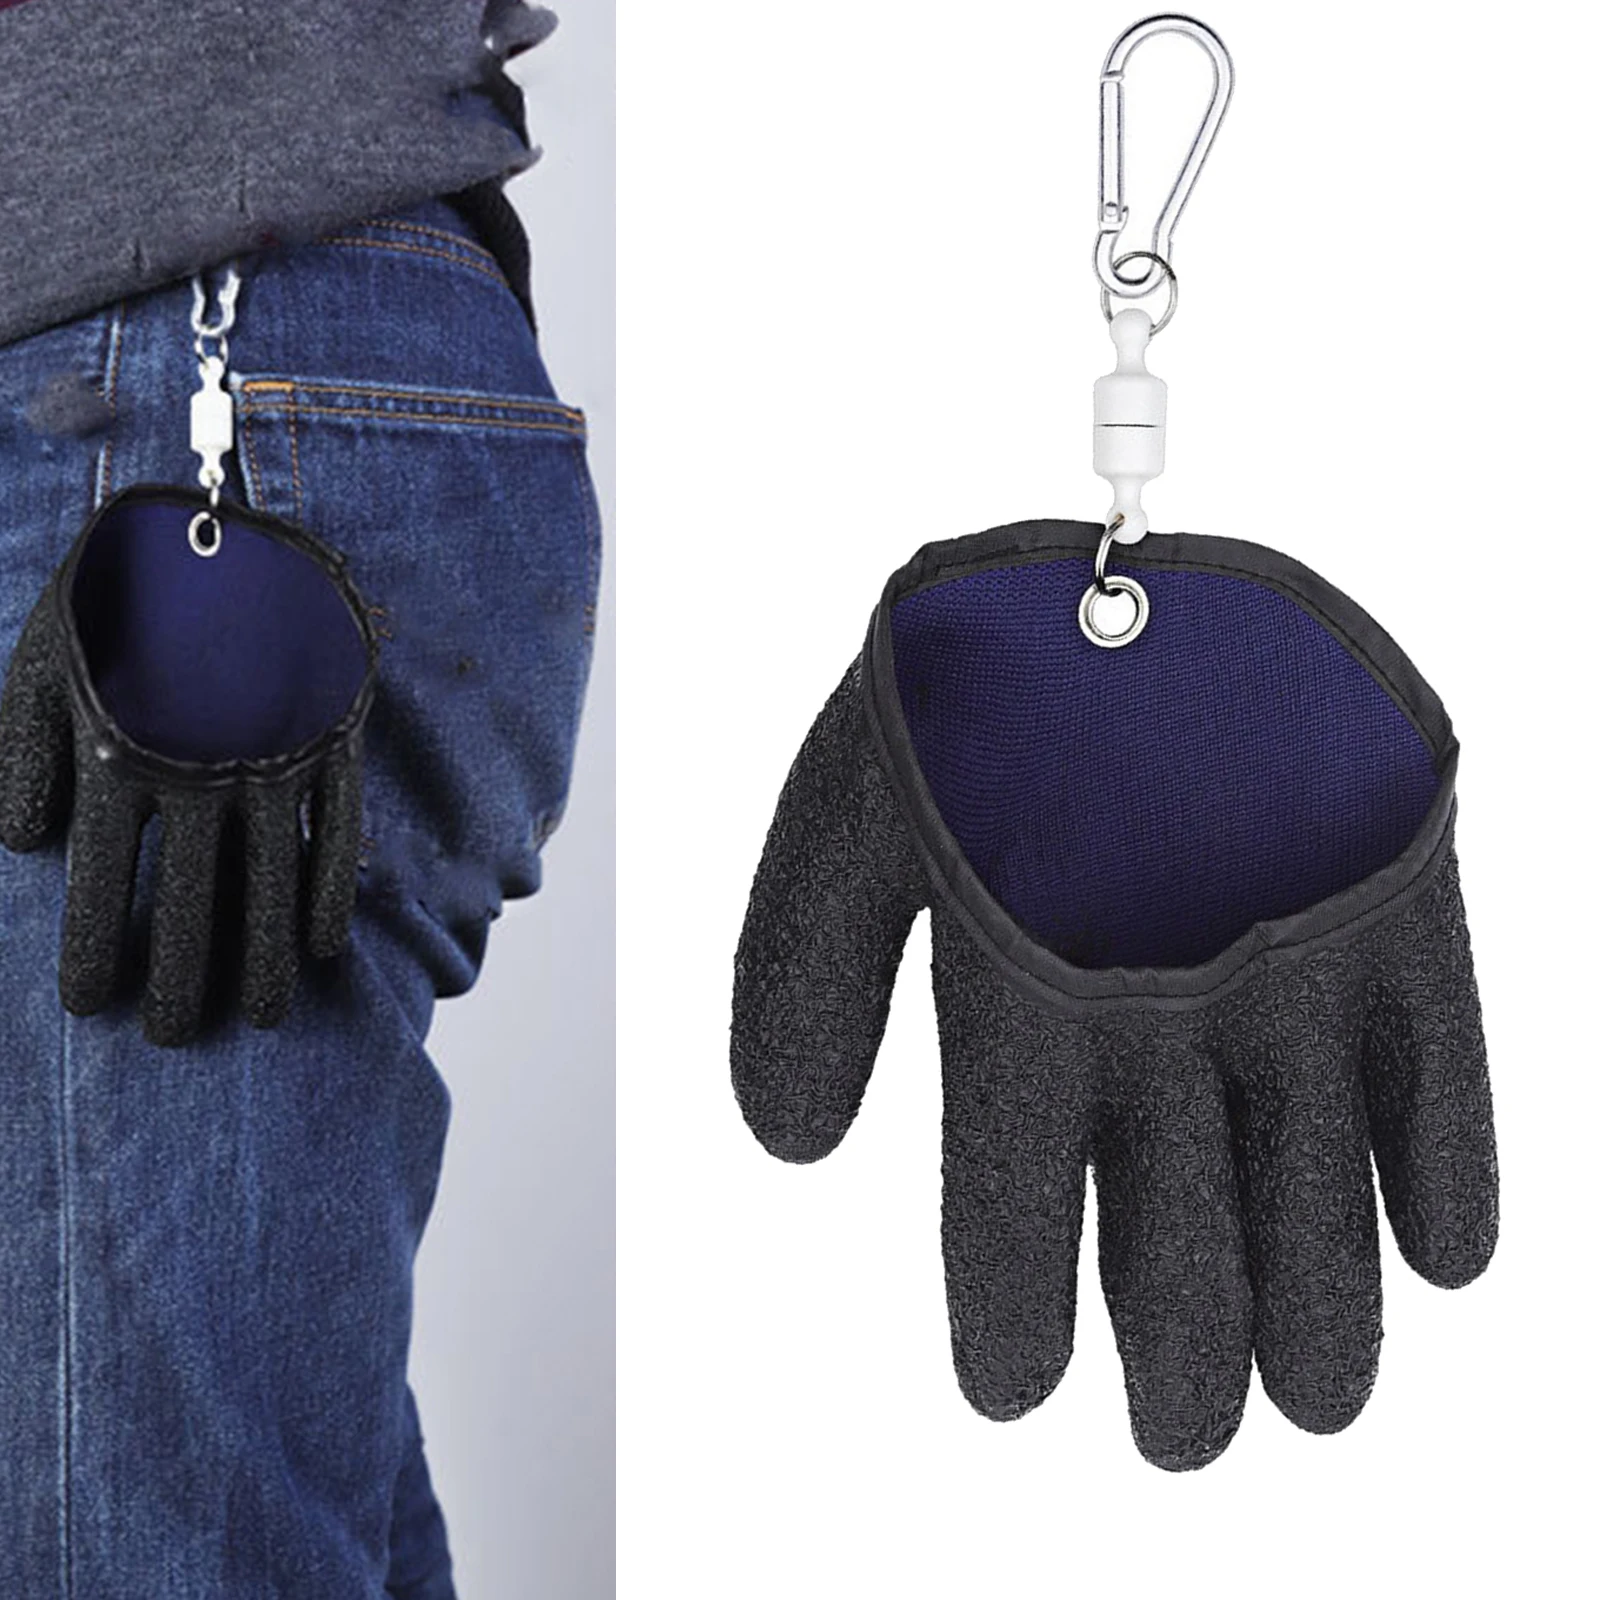 Fishing Glove with / Magnet Release, Professional Fisherman Fish Gloves